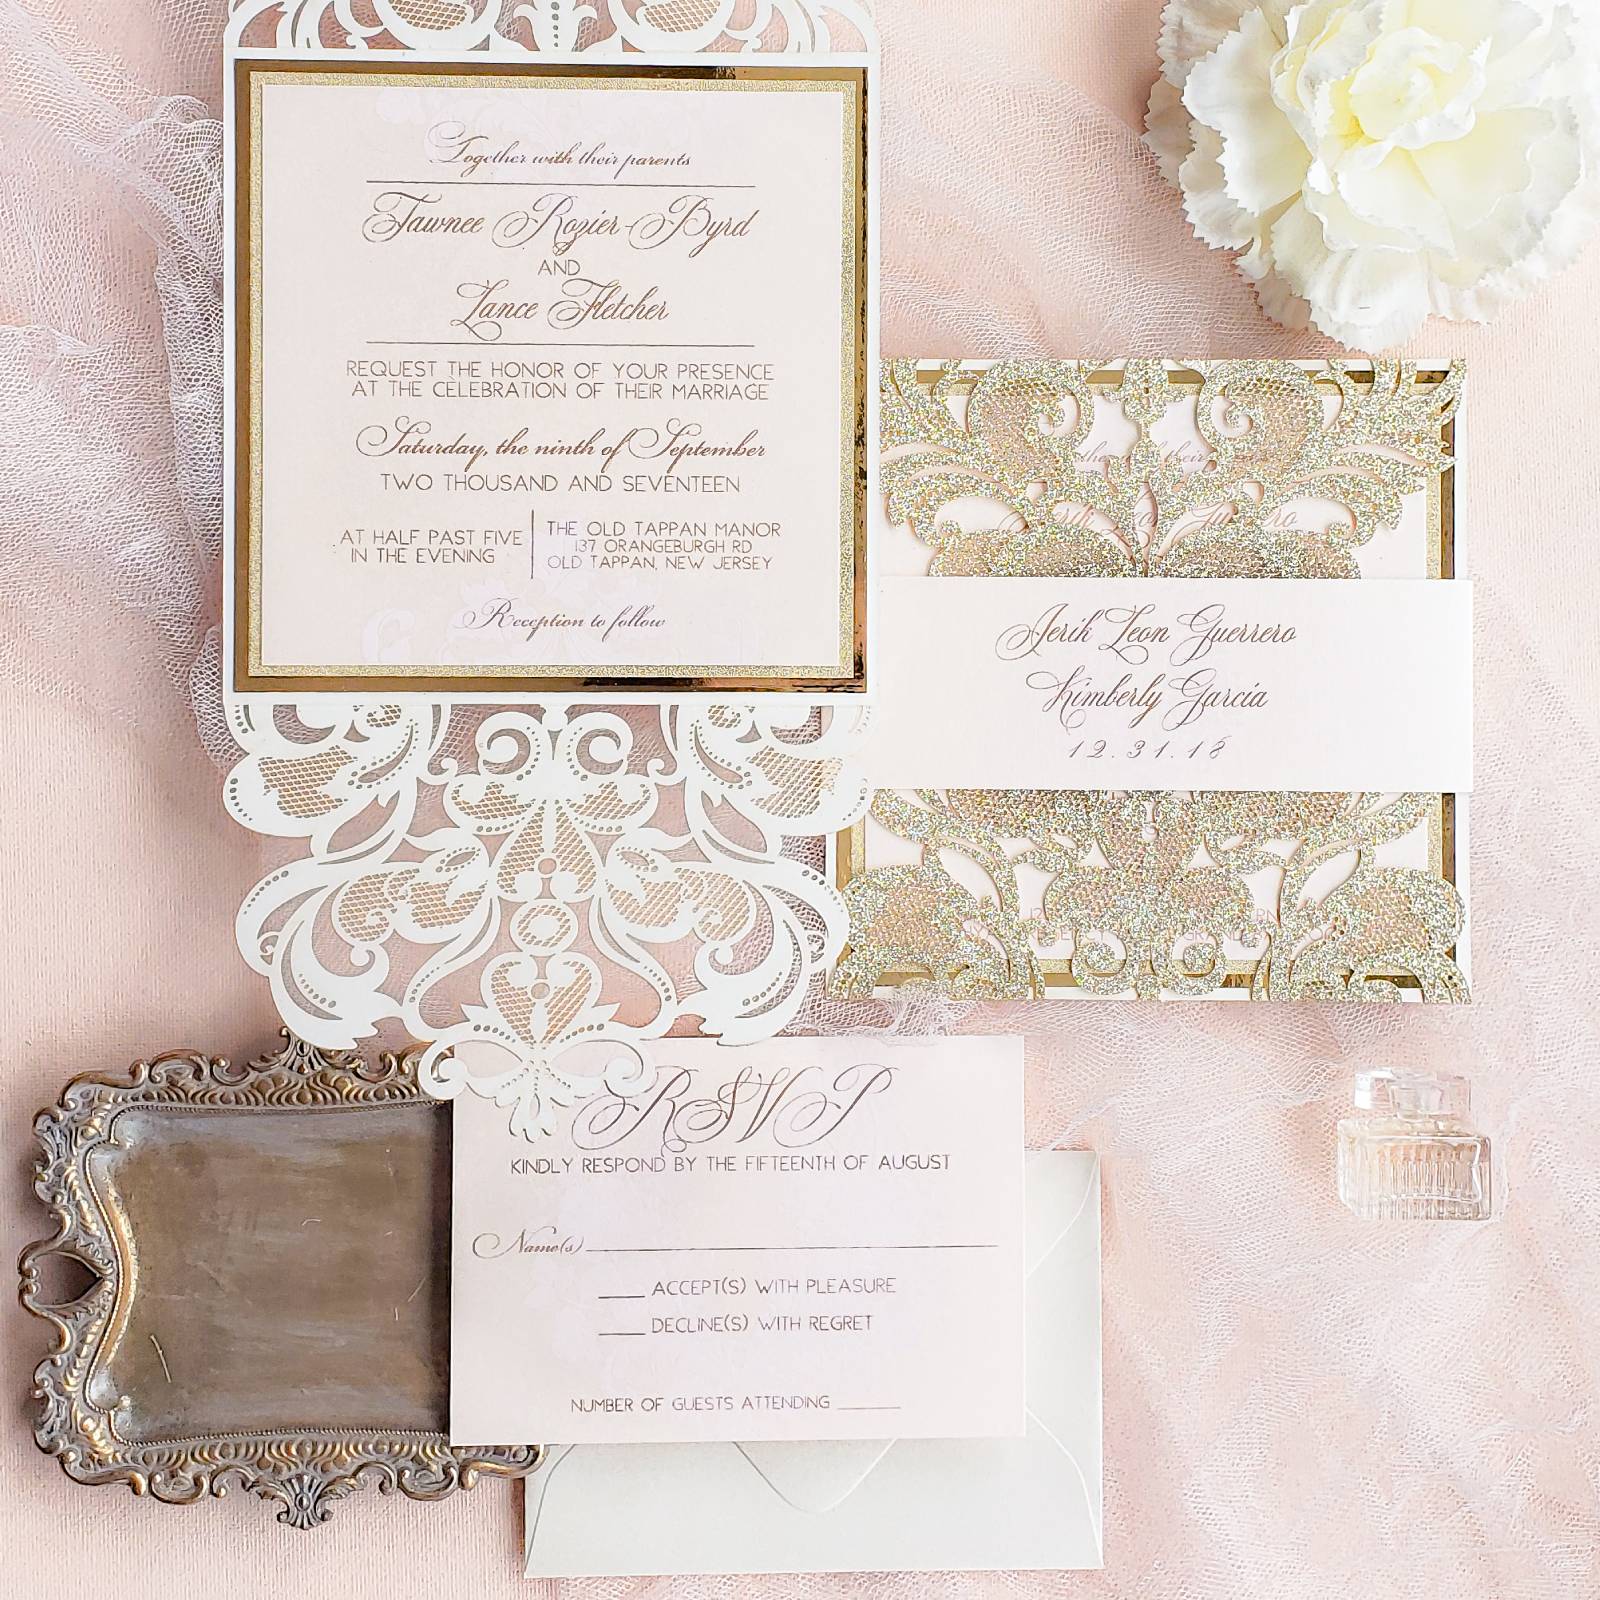 [vc_row][vc_column][vc_column_text]Purchase this listing to get a sample of our Astral wedding invitation suite.

The sample includes:

• 5.9